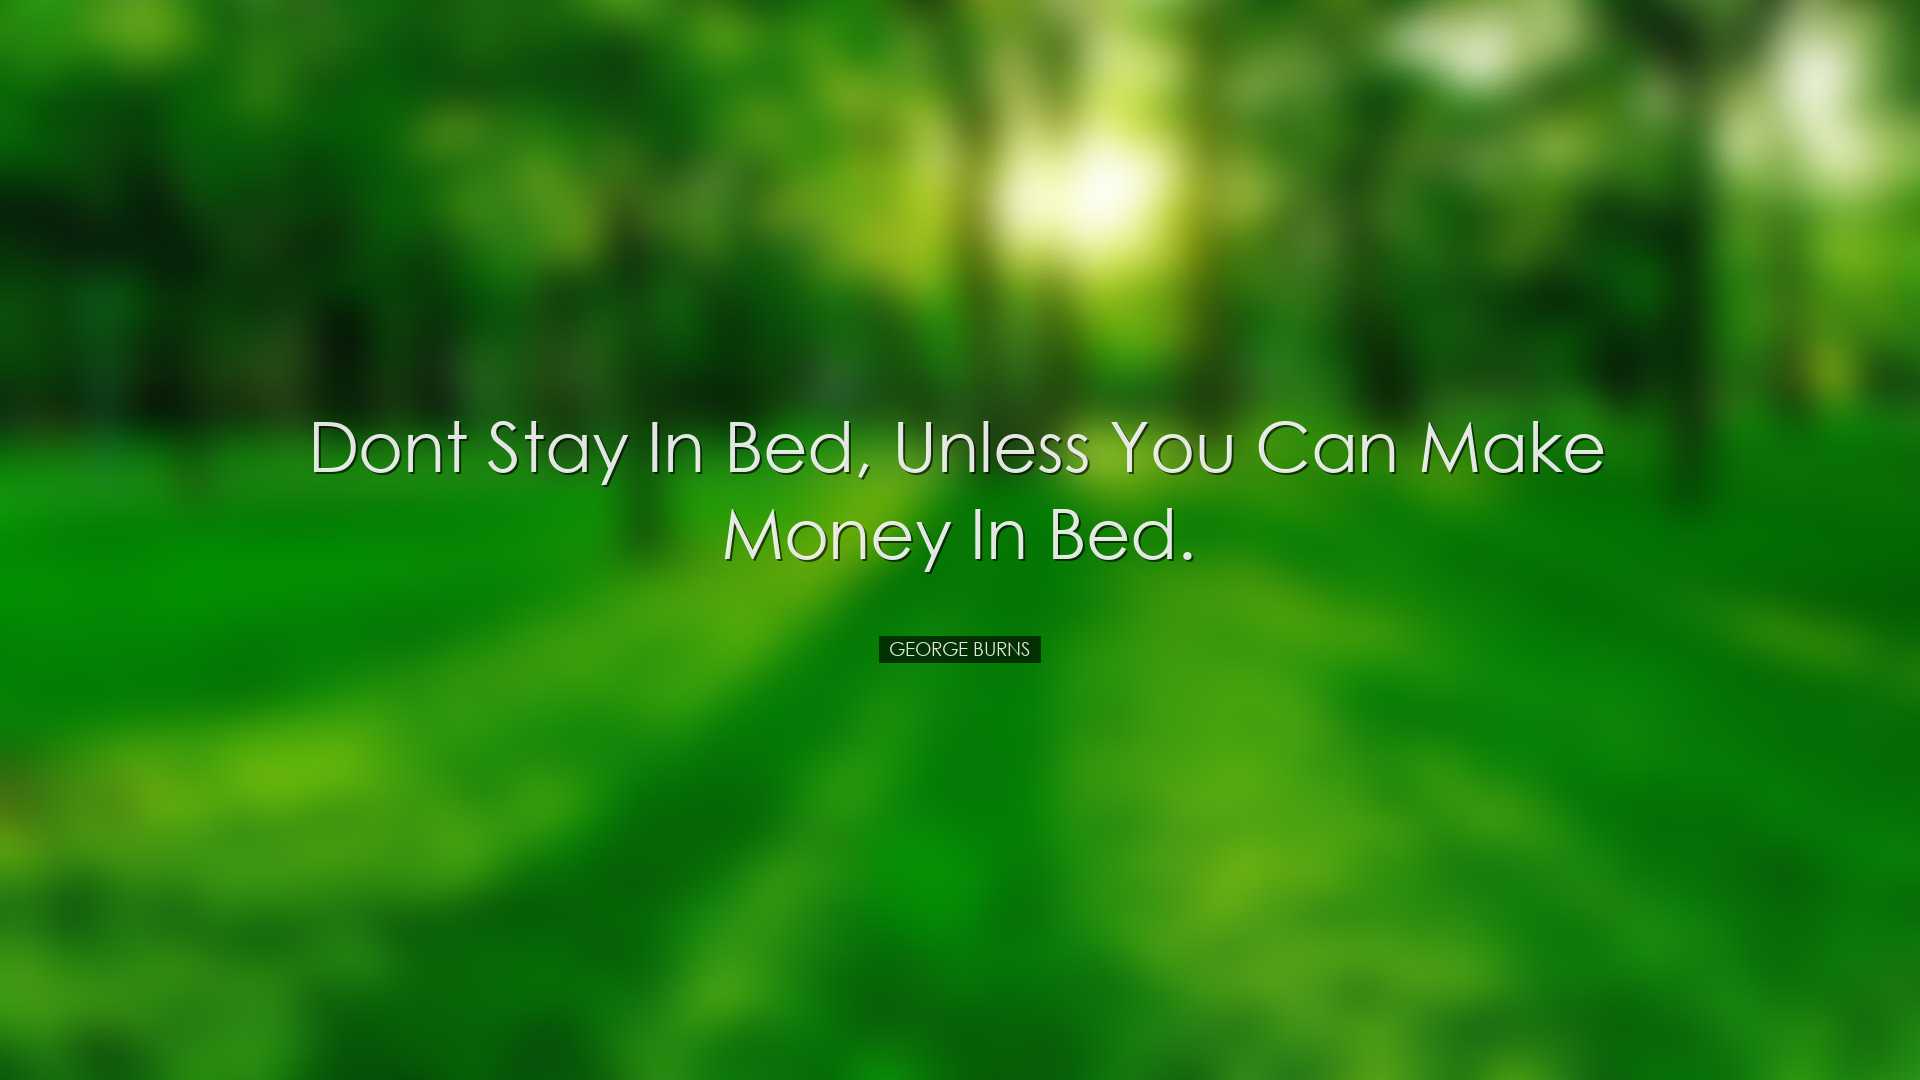 Dont stay in bed, unless you can make money in bed. - George Burns